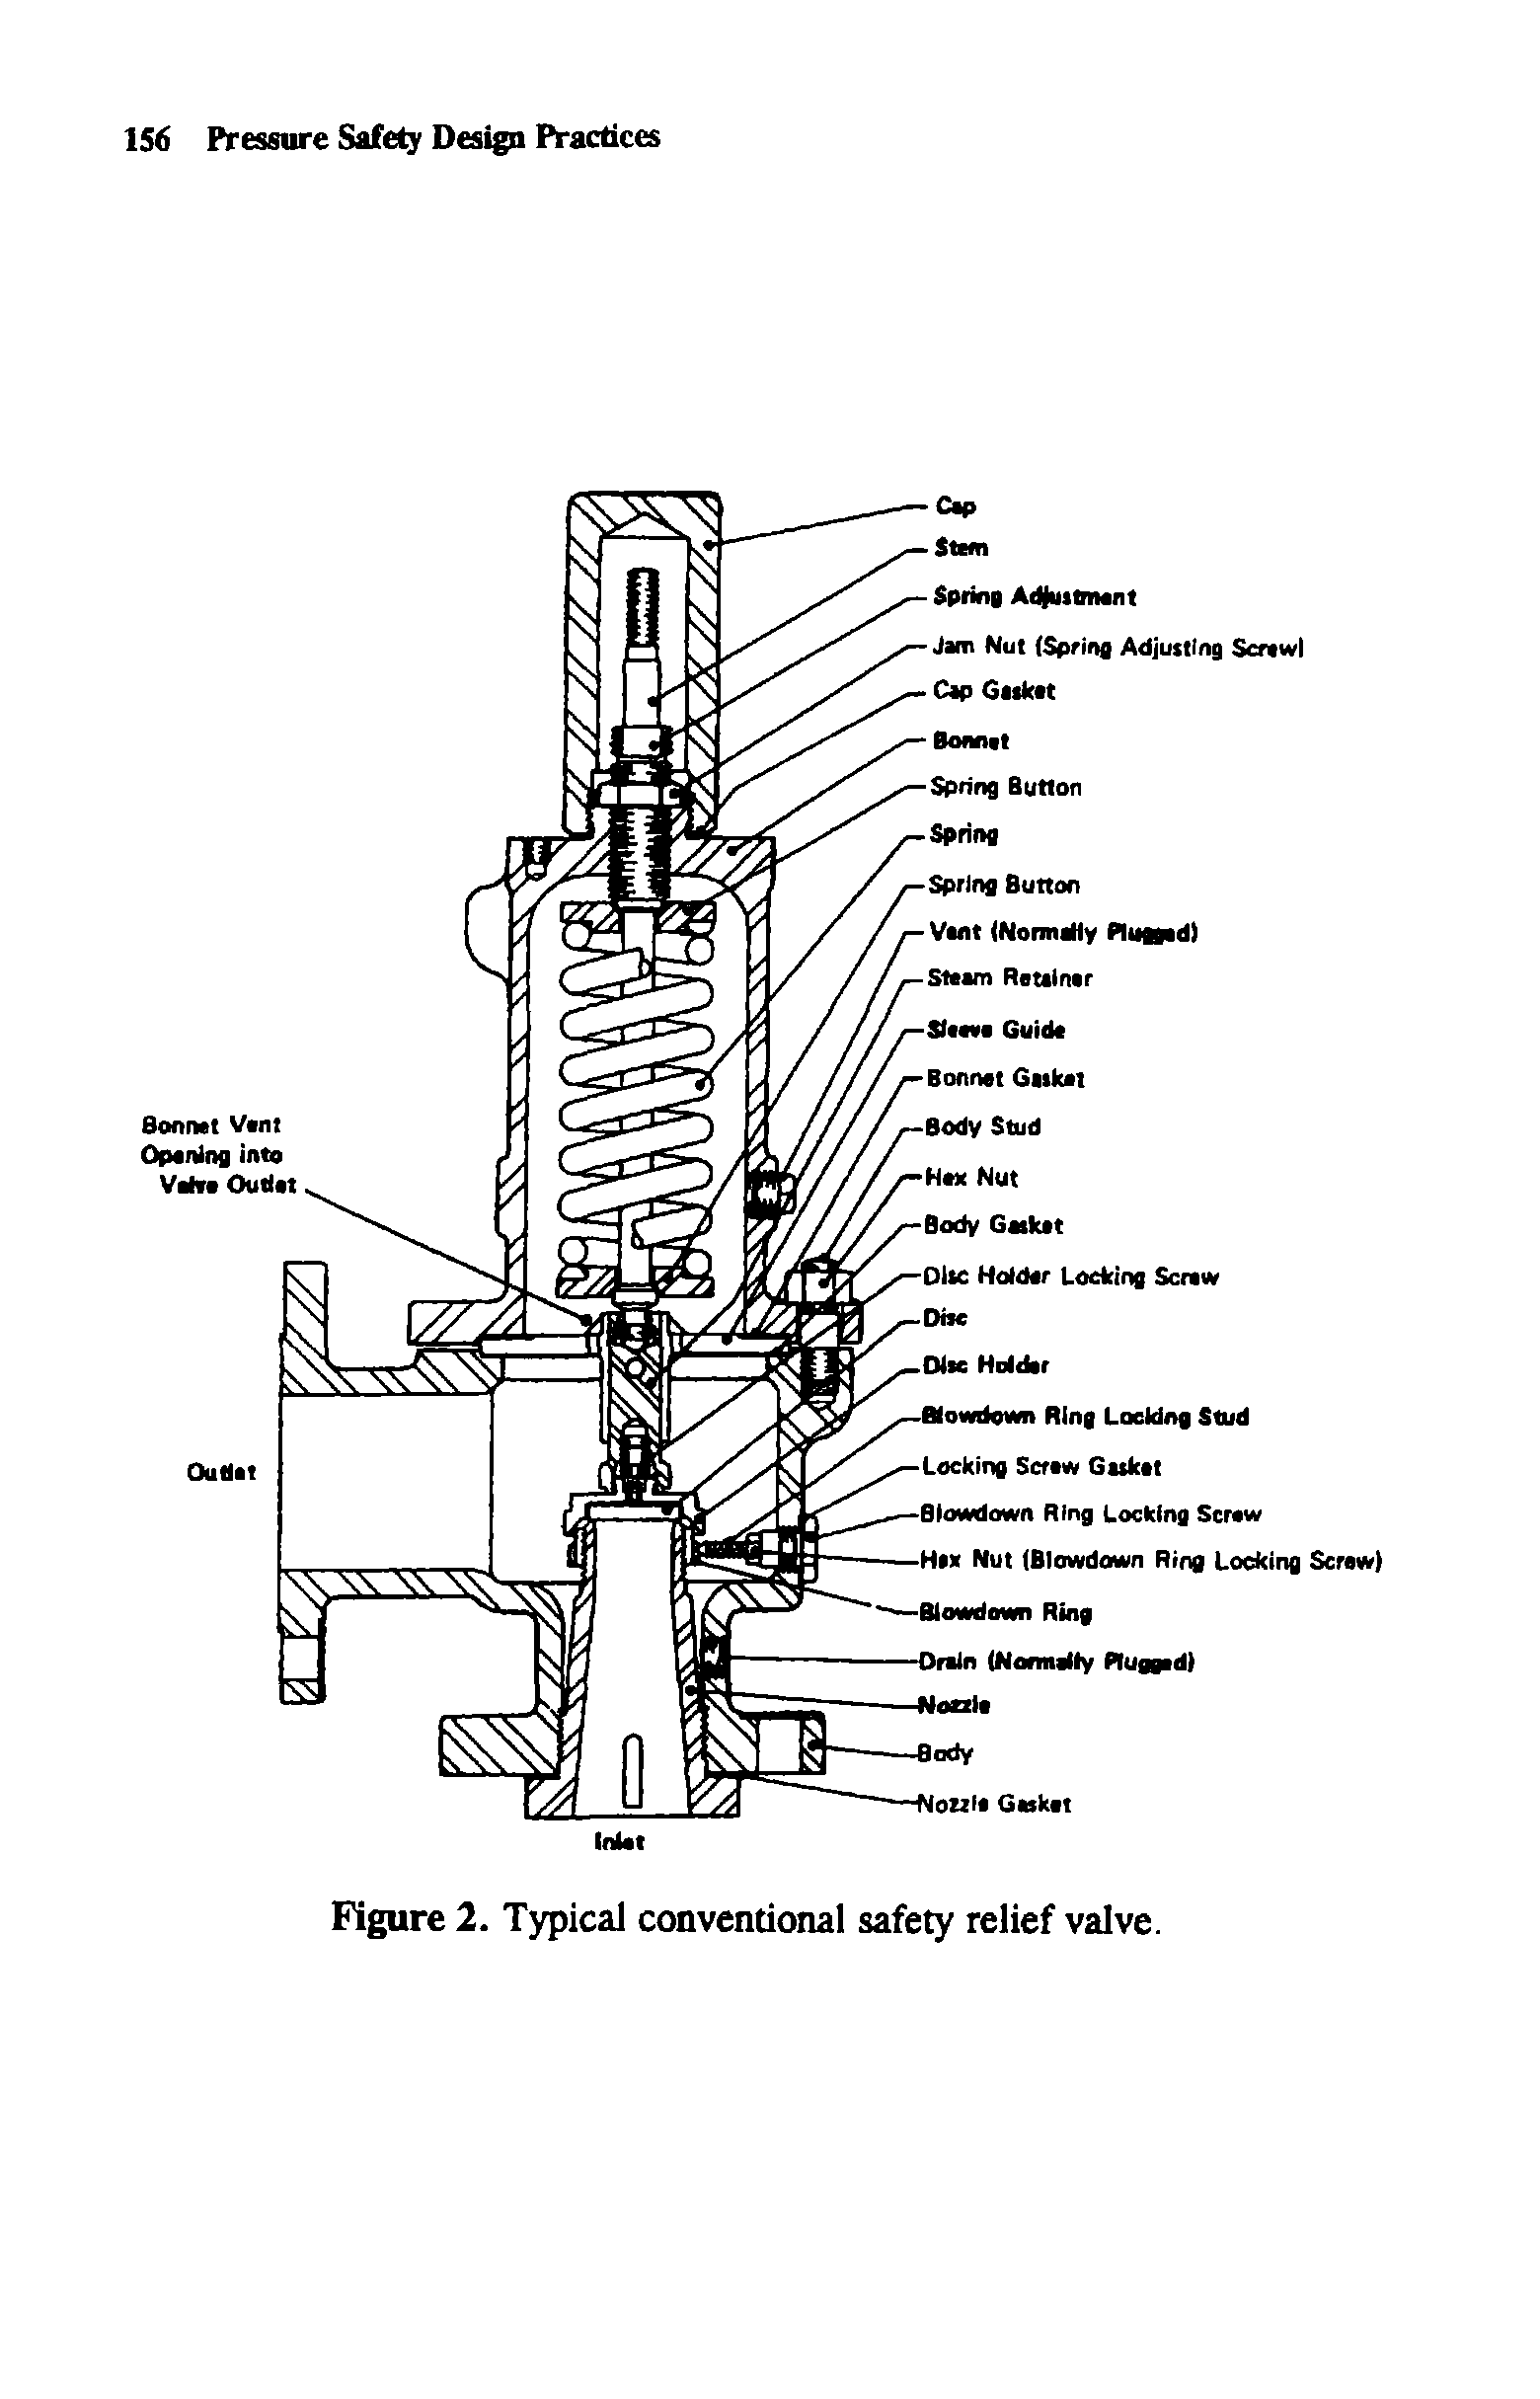 Figure 2. Typical conventional safety relief valve.